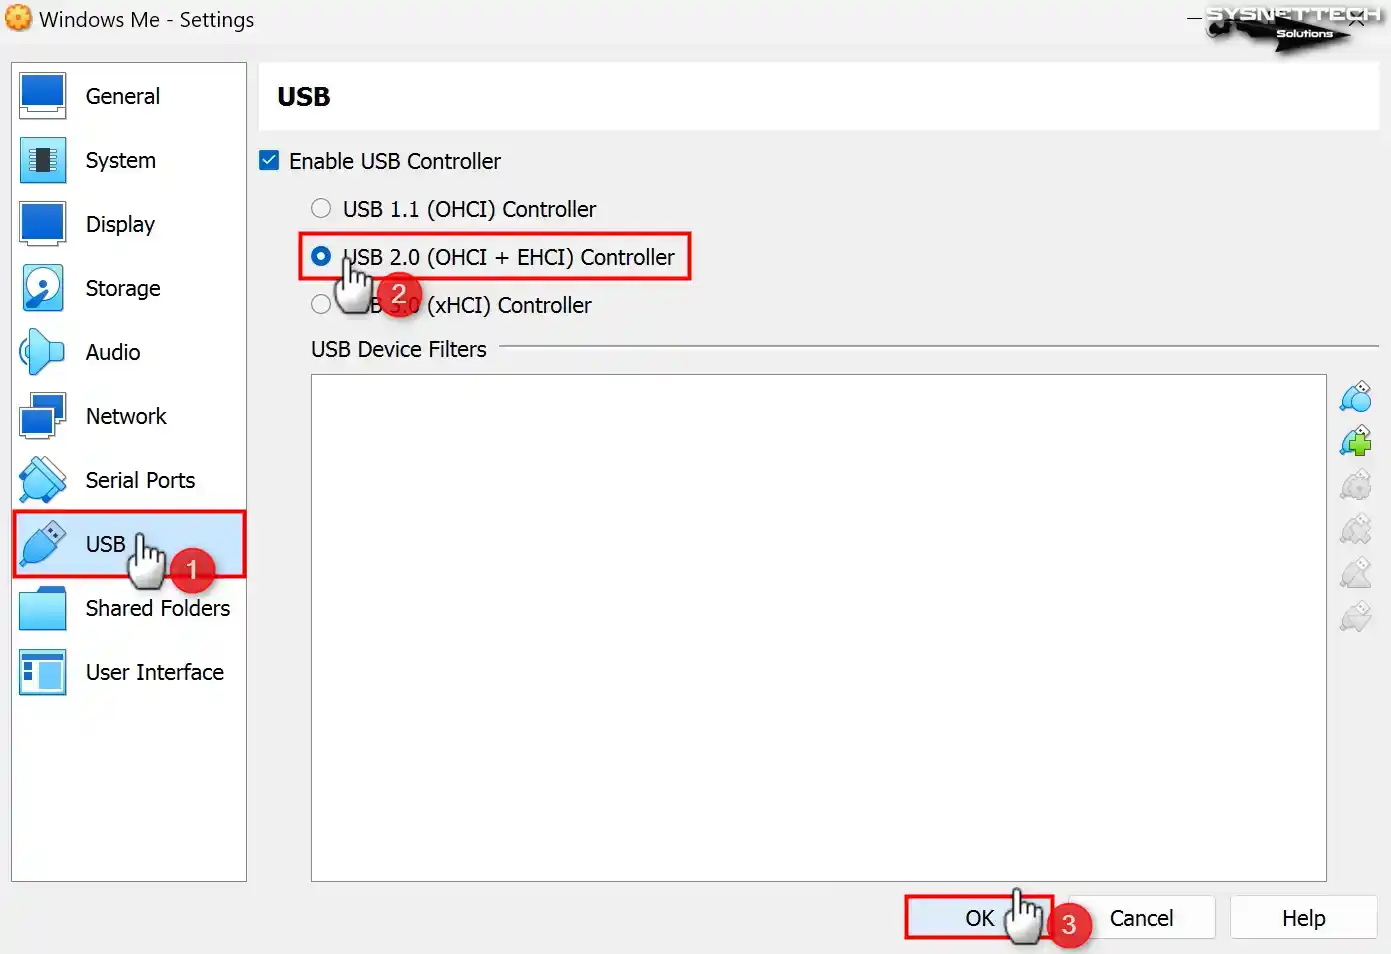 Selecting the USB 2.0 Controller